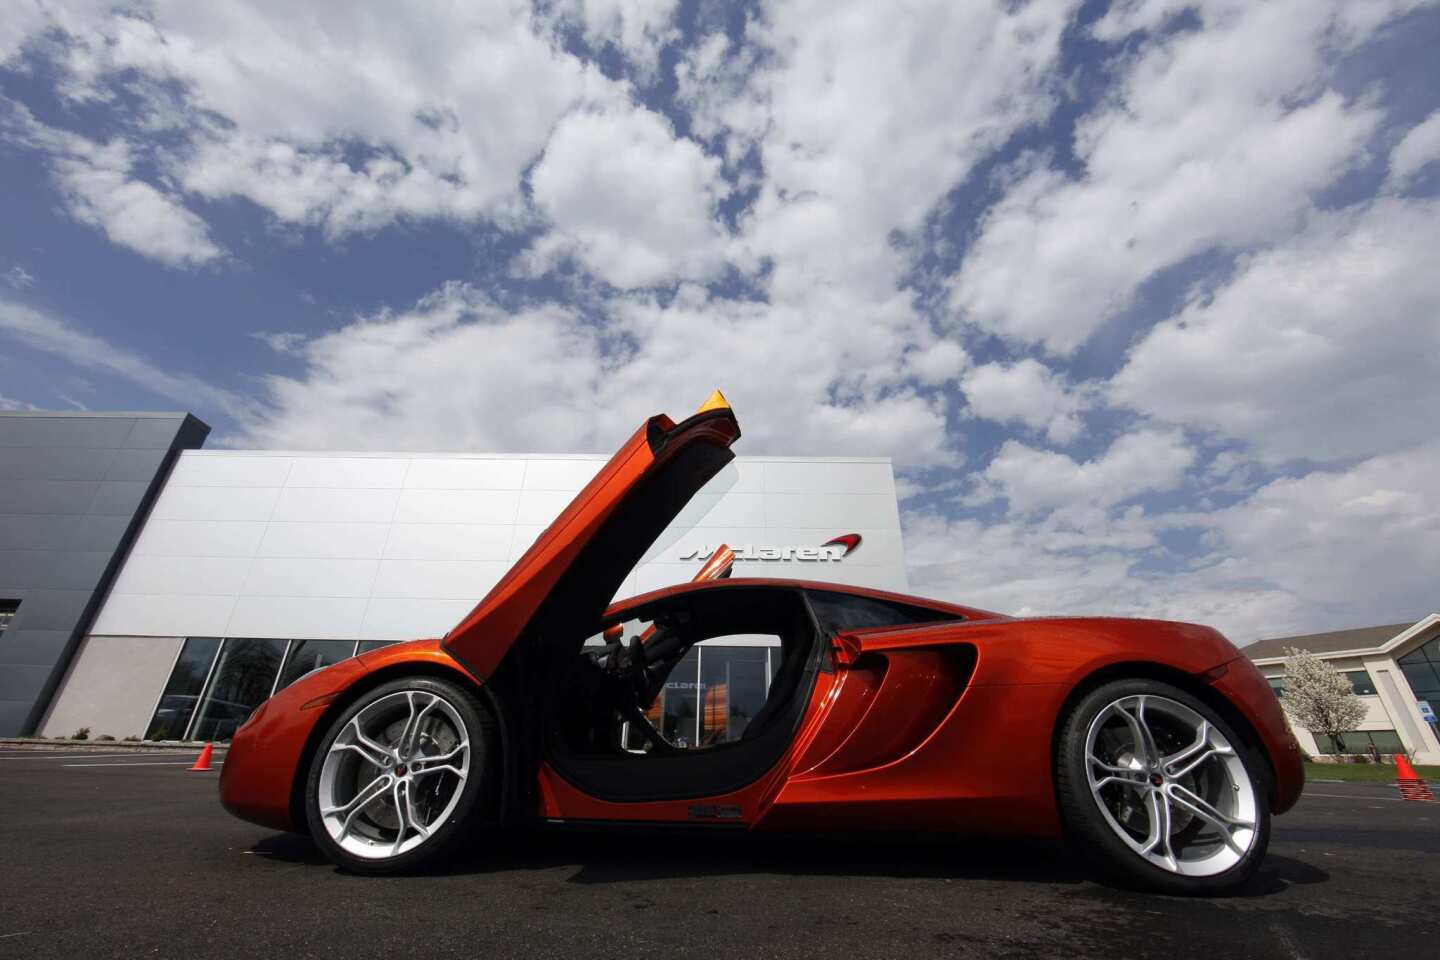 The McLaren MP4-12C is an all-new, mid-engined, rear-wheel-drive car. Above, a 12C at a dealership in West Chester, Pa.